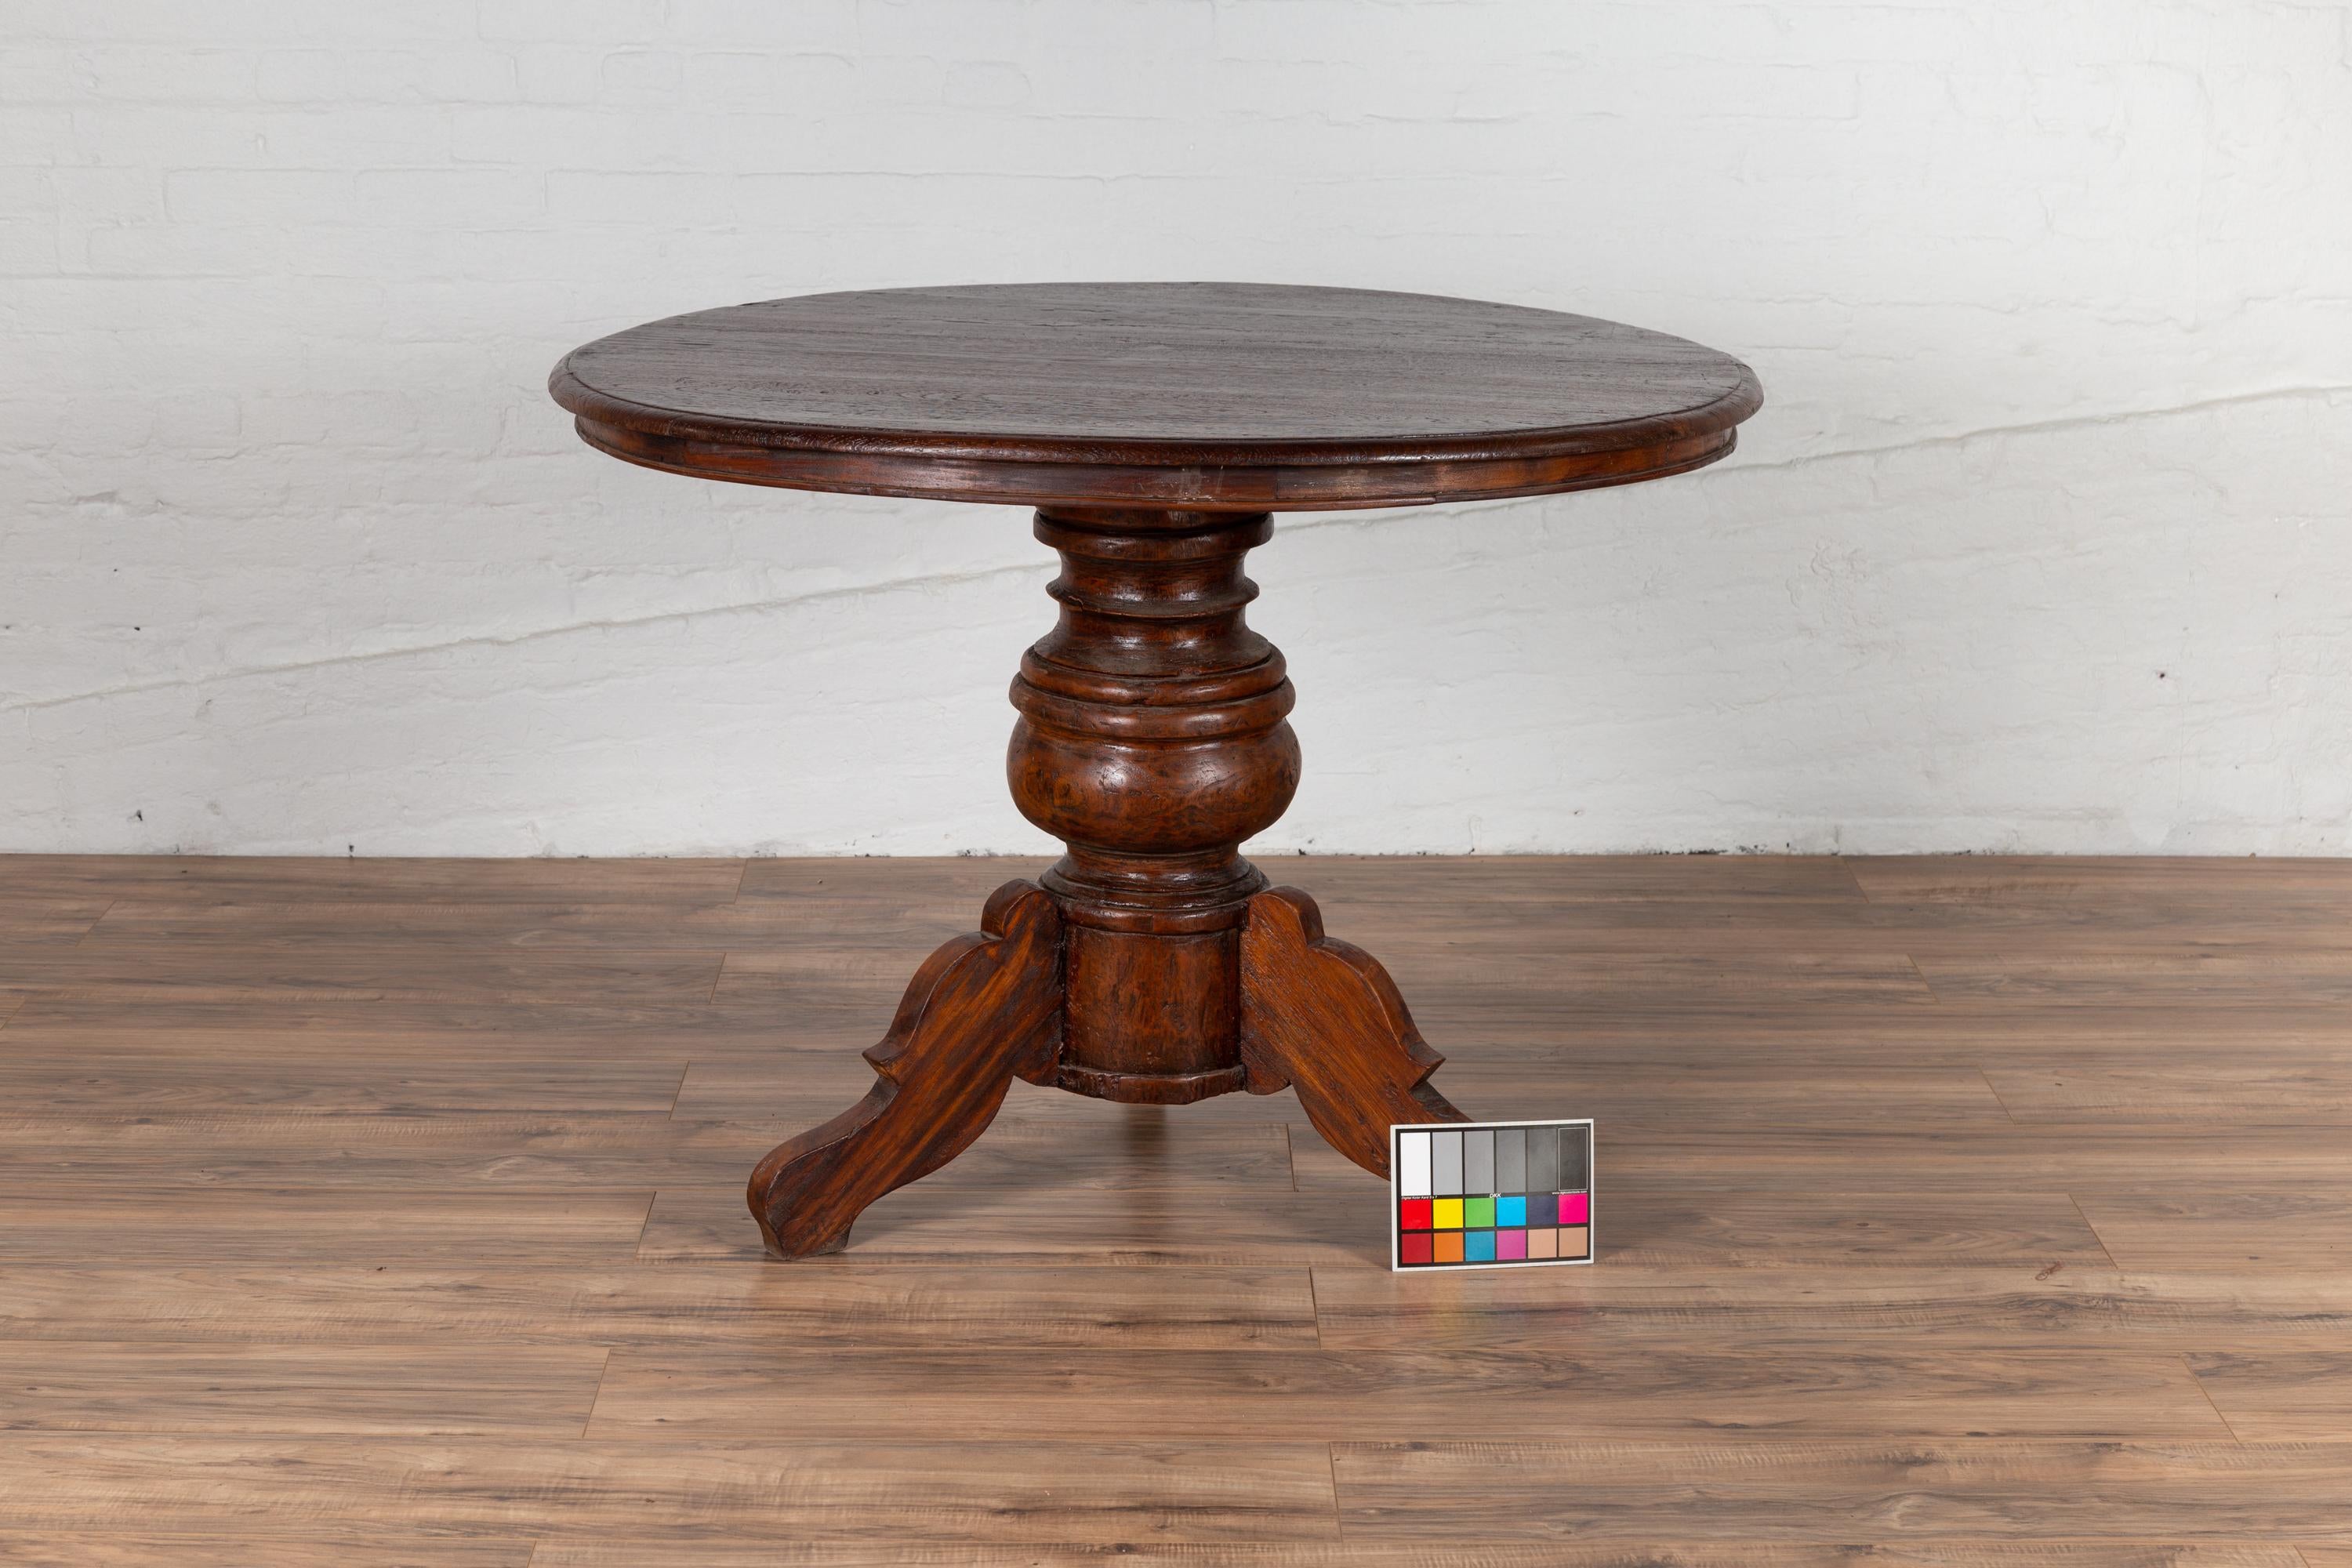 Dutch Colonial Javanese Pedestal Tripod Table with Circular Top and Turned Base 6